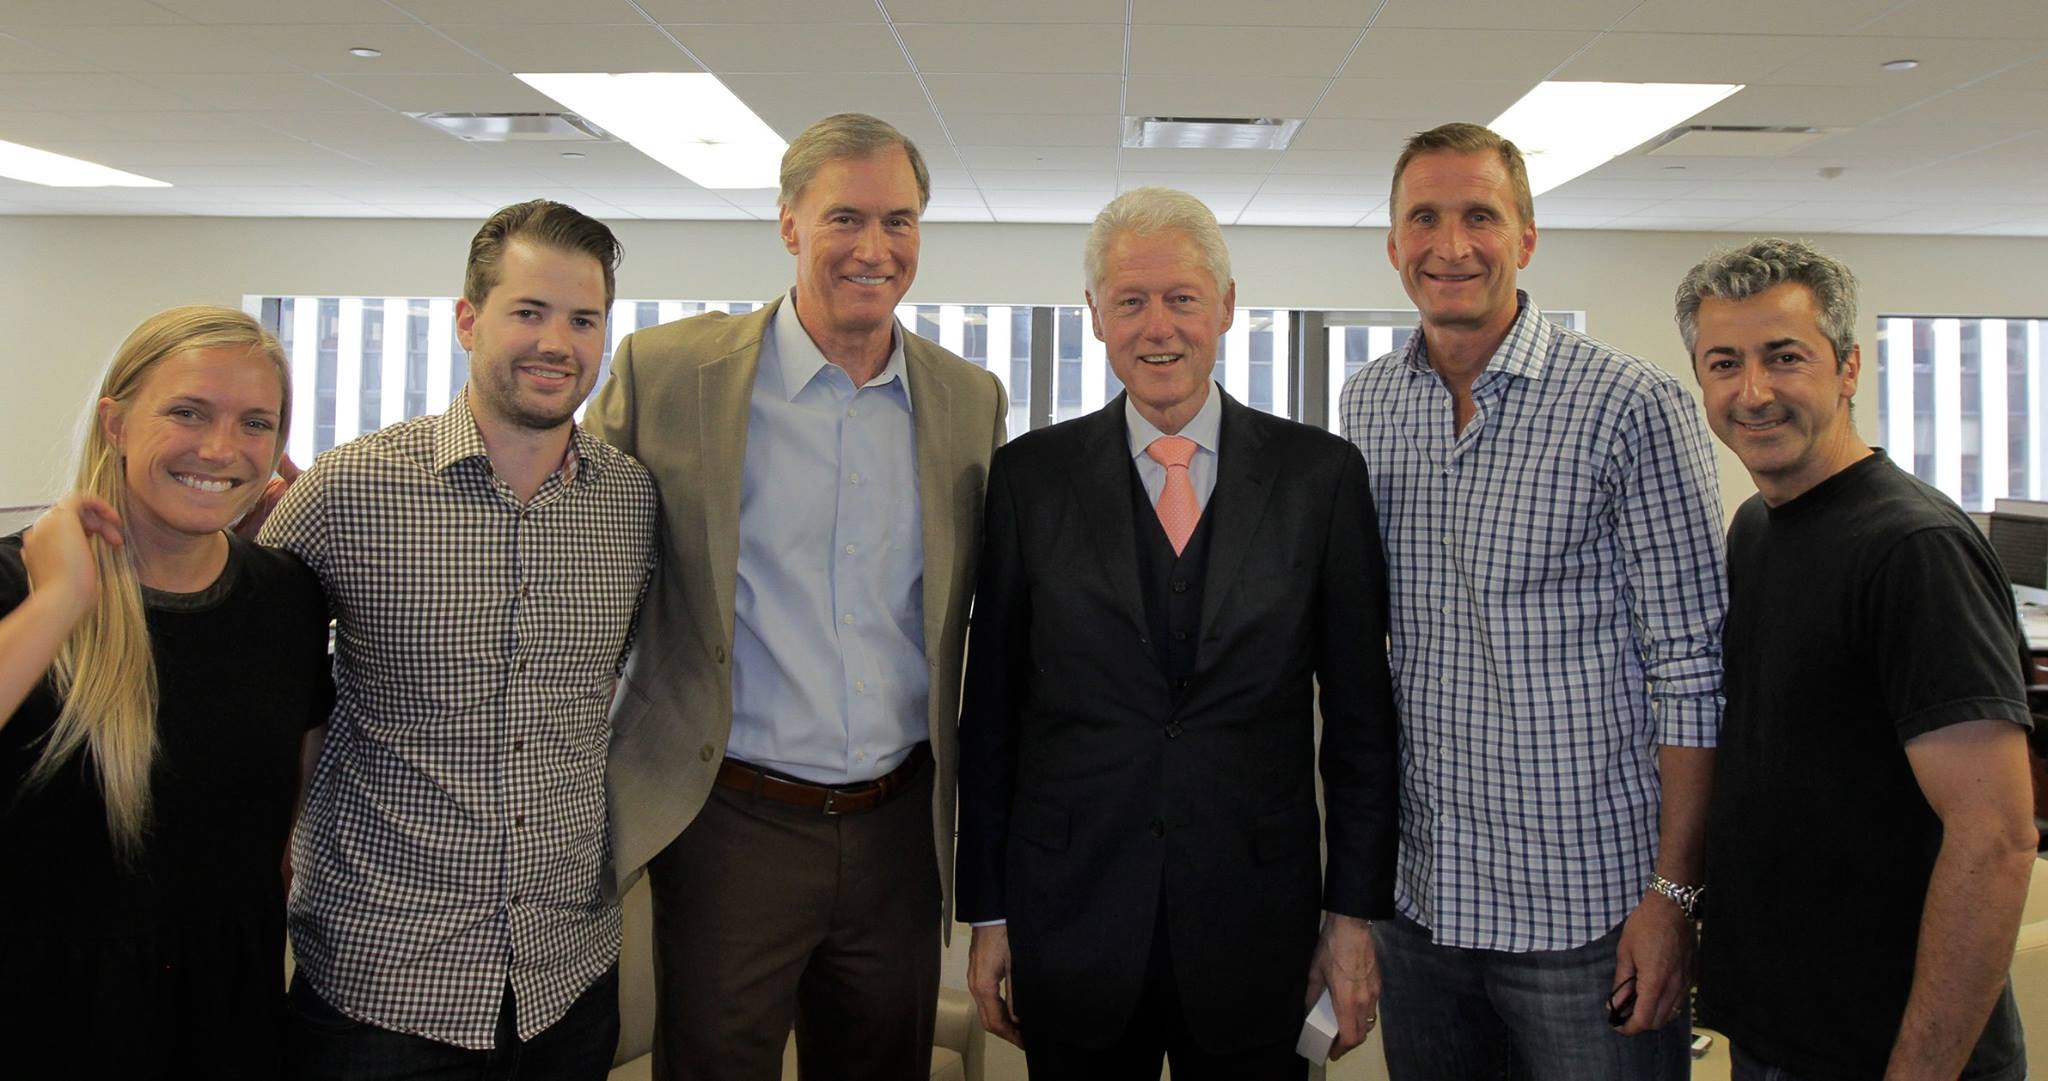  With President Bill Clinton after an interview for  The Garden's Defining Moments .&nbsp;  From L to R: Producer McKenzie Barney, Senior Producer Dan Galway,&nbsp;Executive Producer &amp; Host Fran Healy, President Bill Clinton, Founder &amp; Execut